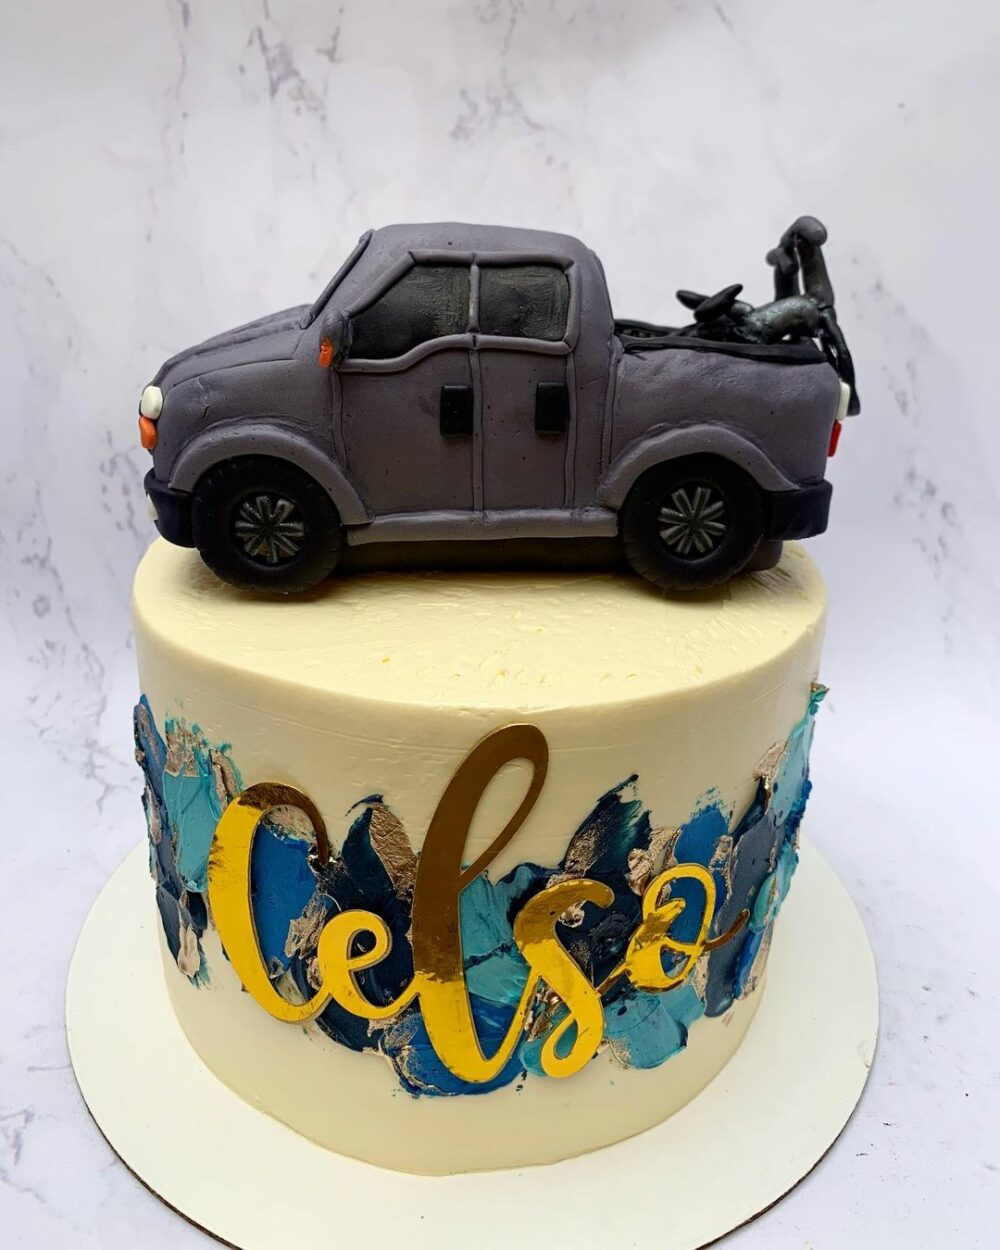 Have fun going on adventures when you eat this travel cake themed like a jeep.